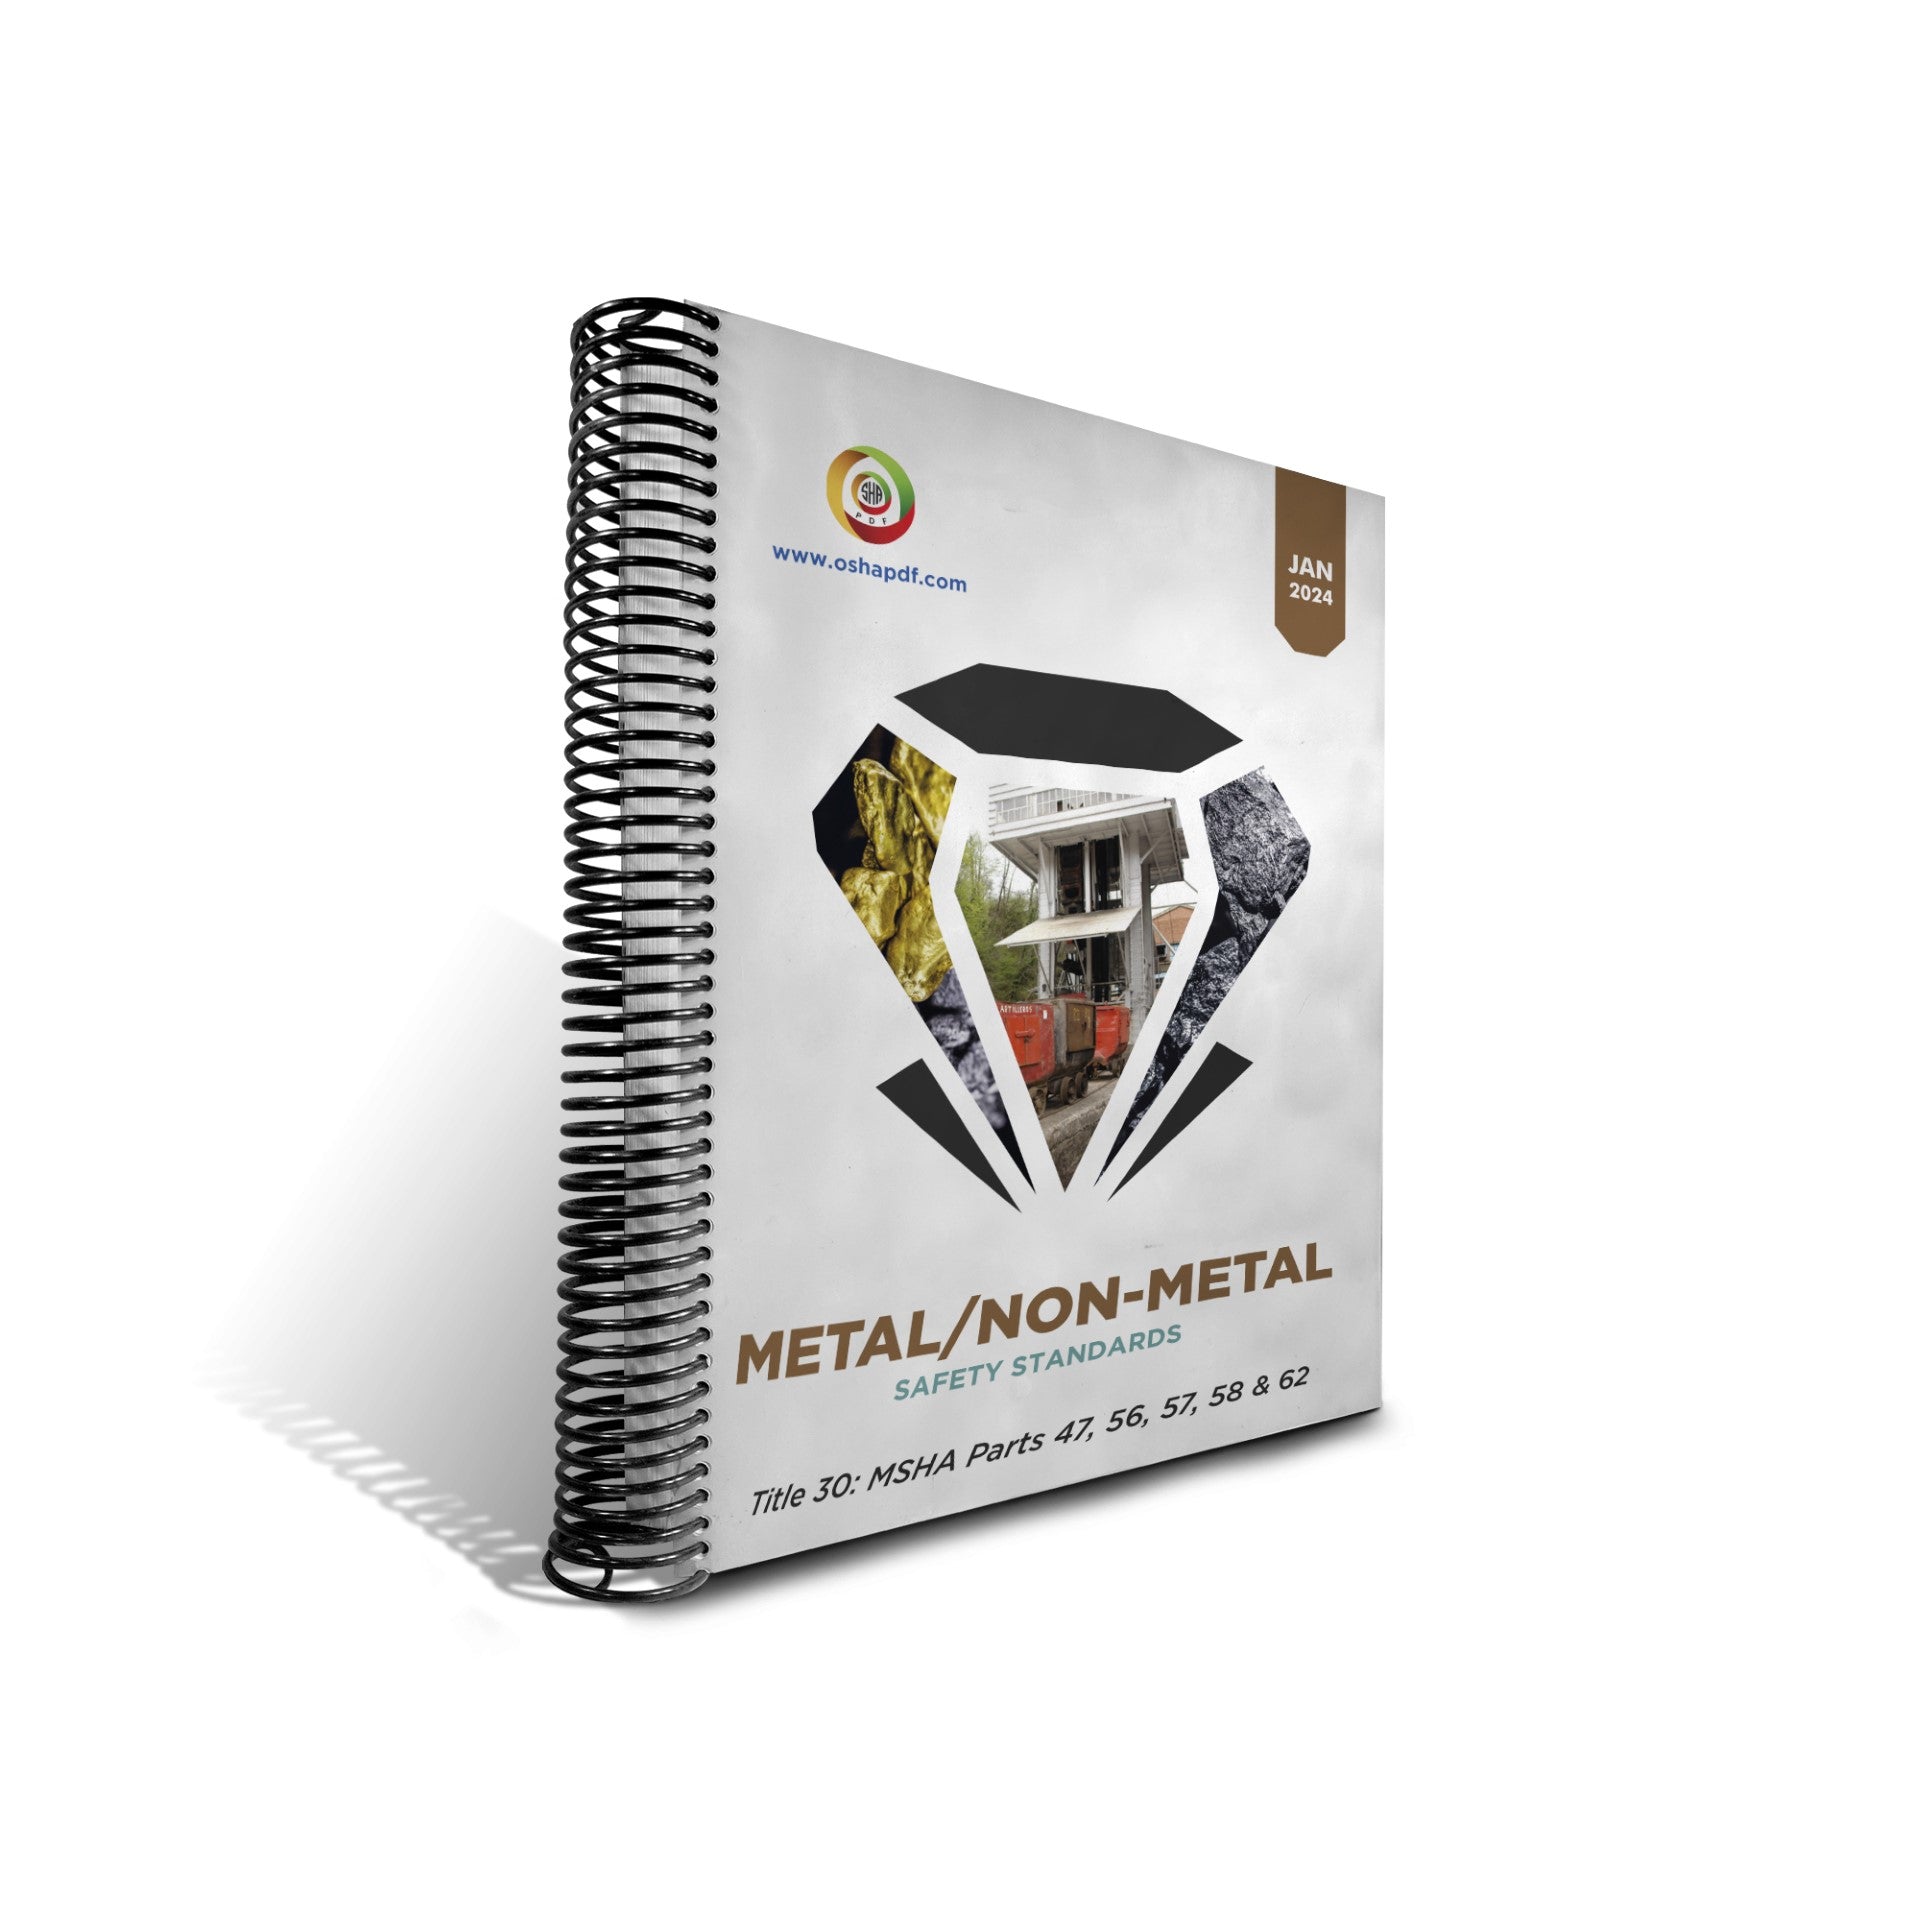 Metal/Nonmetal Mine Safety & Health Regulations: Title 30 MSHA Parts 47 & 56-62 - Pocket Guide - January 2024